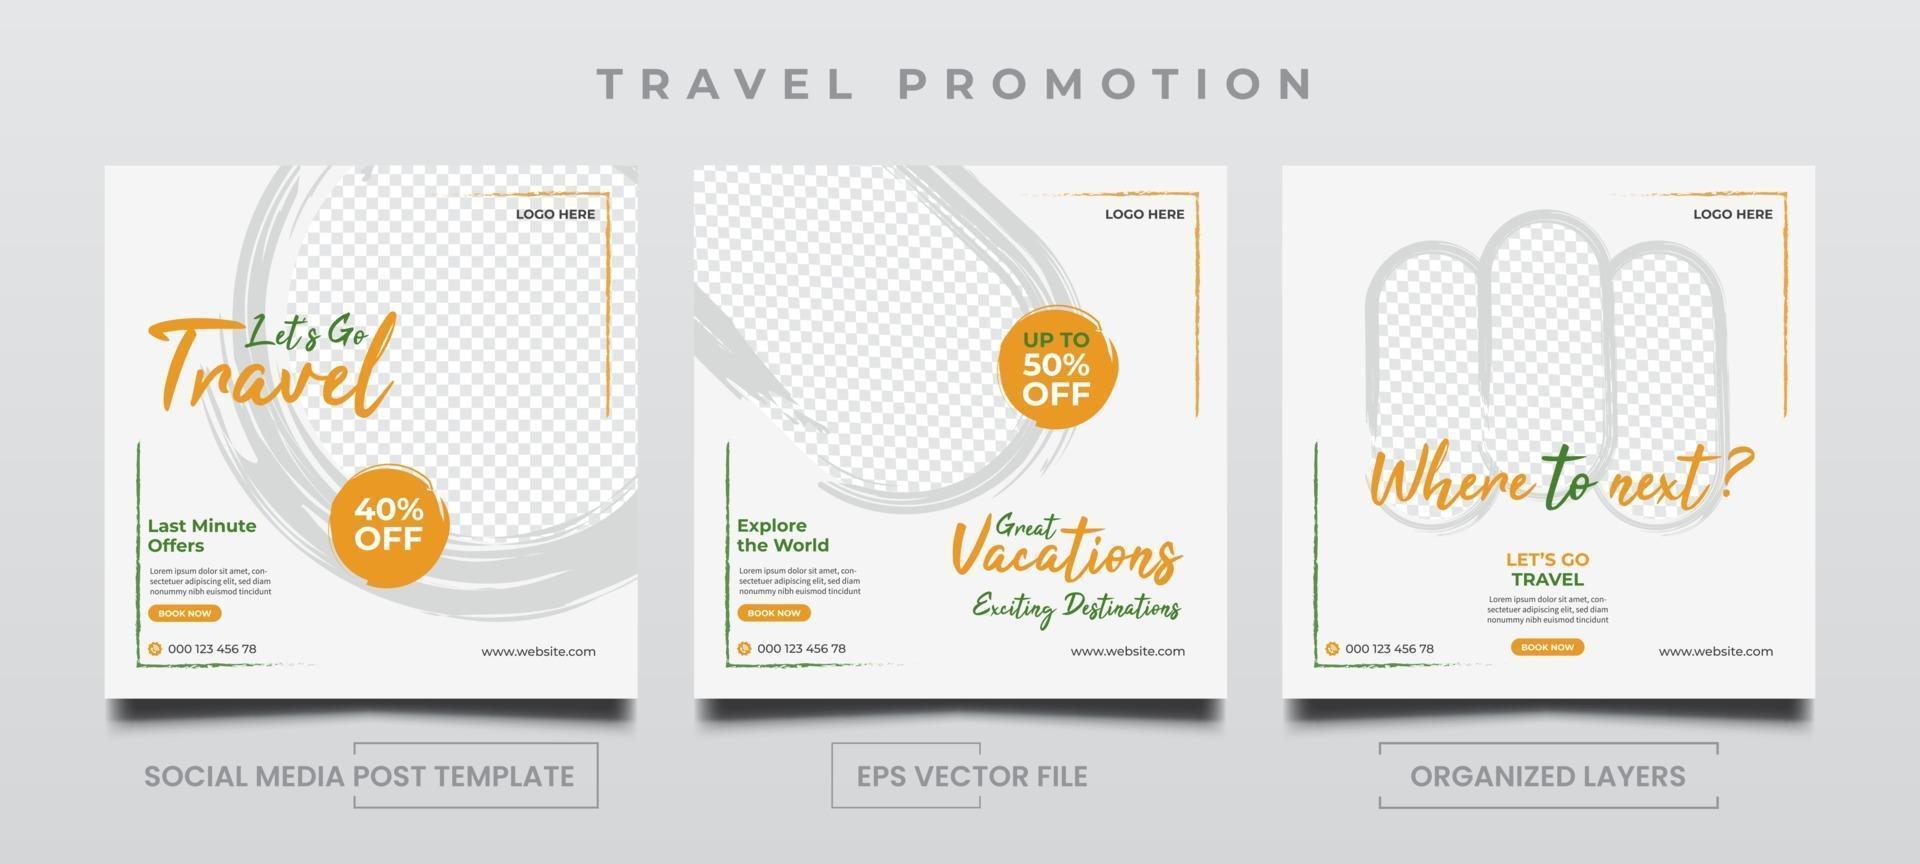 Travel Promotion templates for social media post ads. vector